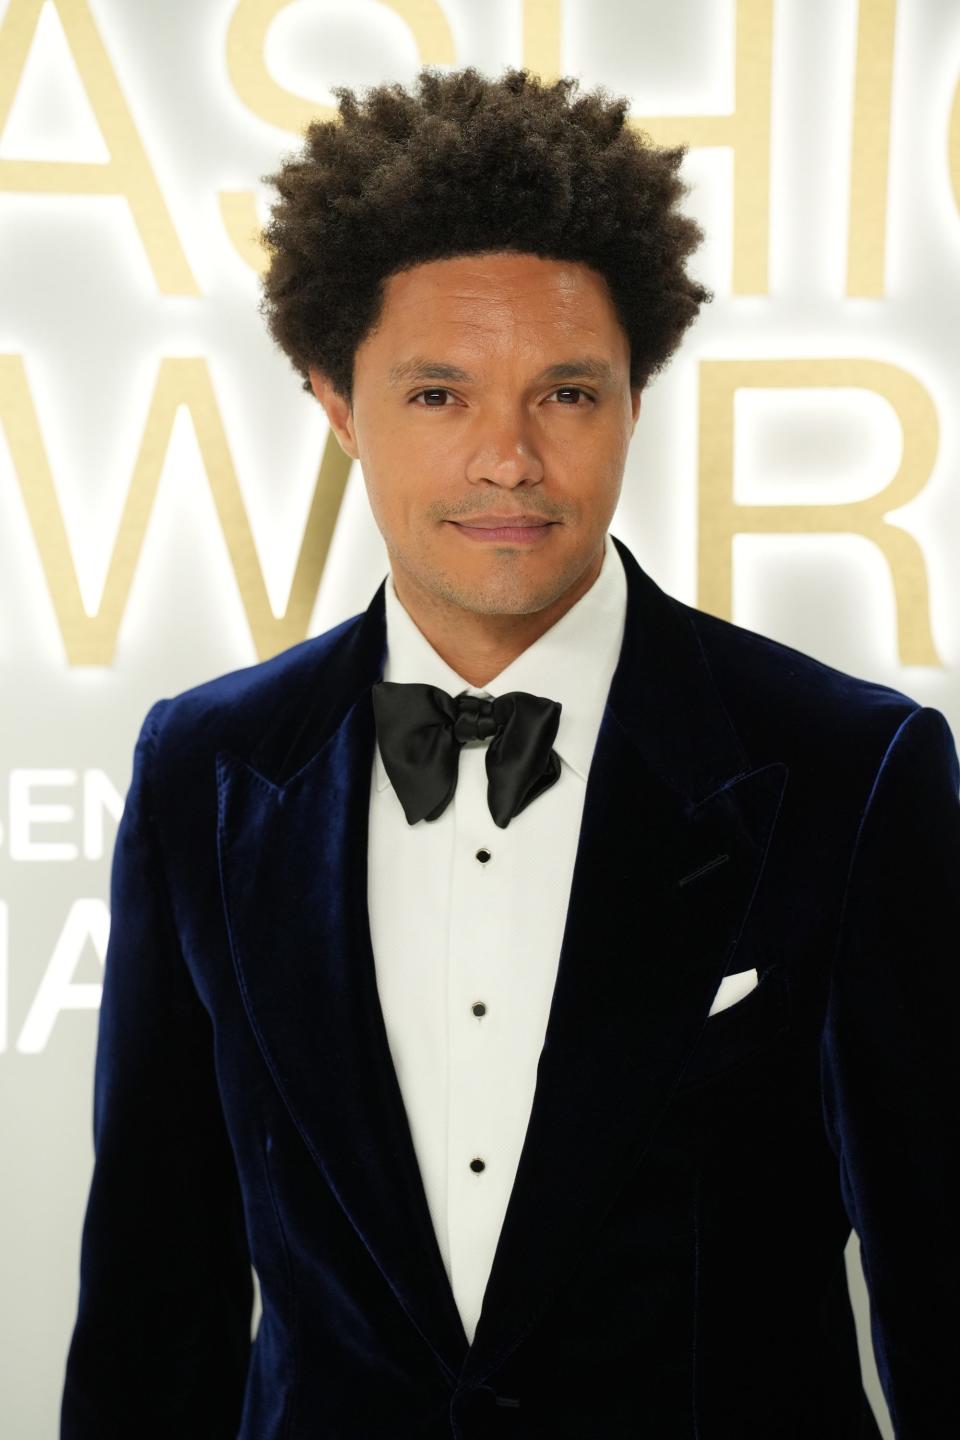 Trevor Noah poses for photos in a blue velvet suit and black bow tie.